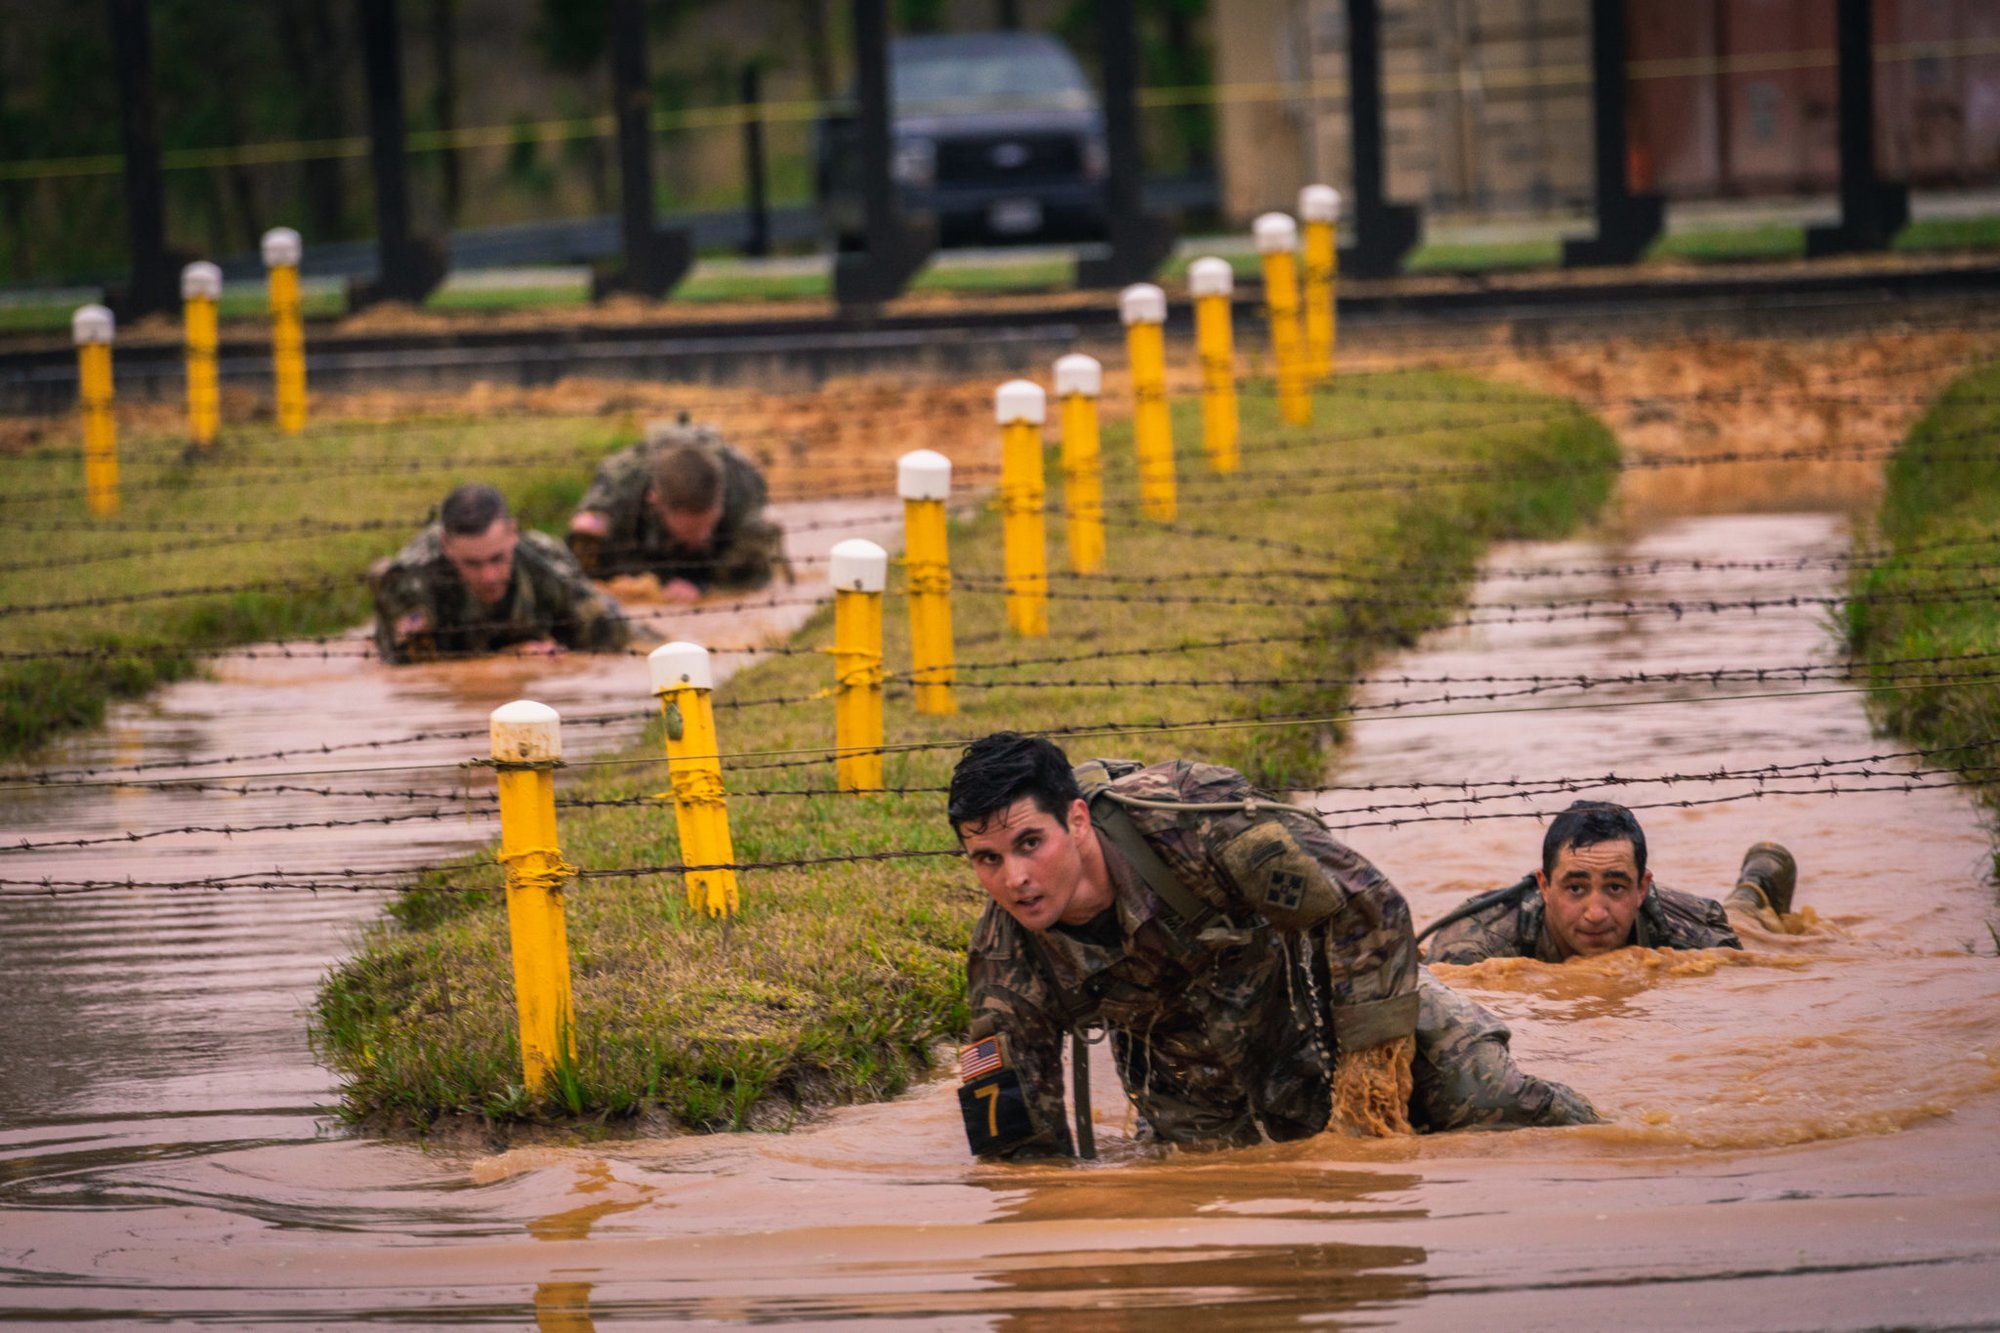 Best Ranger competitors negotiate a water obstacle on the Malvesti obstacle course at Camp Rogers. Photo by Marty Skovlund, Jr./Coffee or Die.